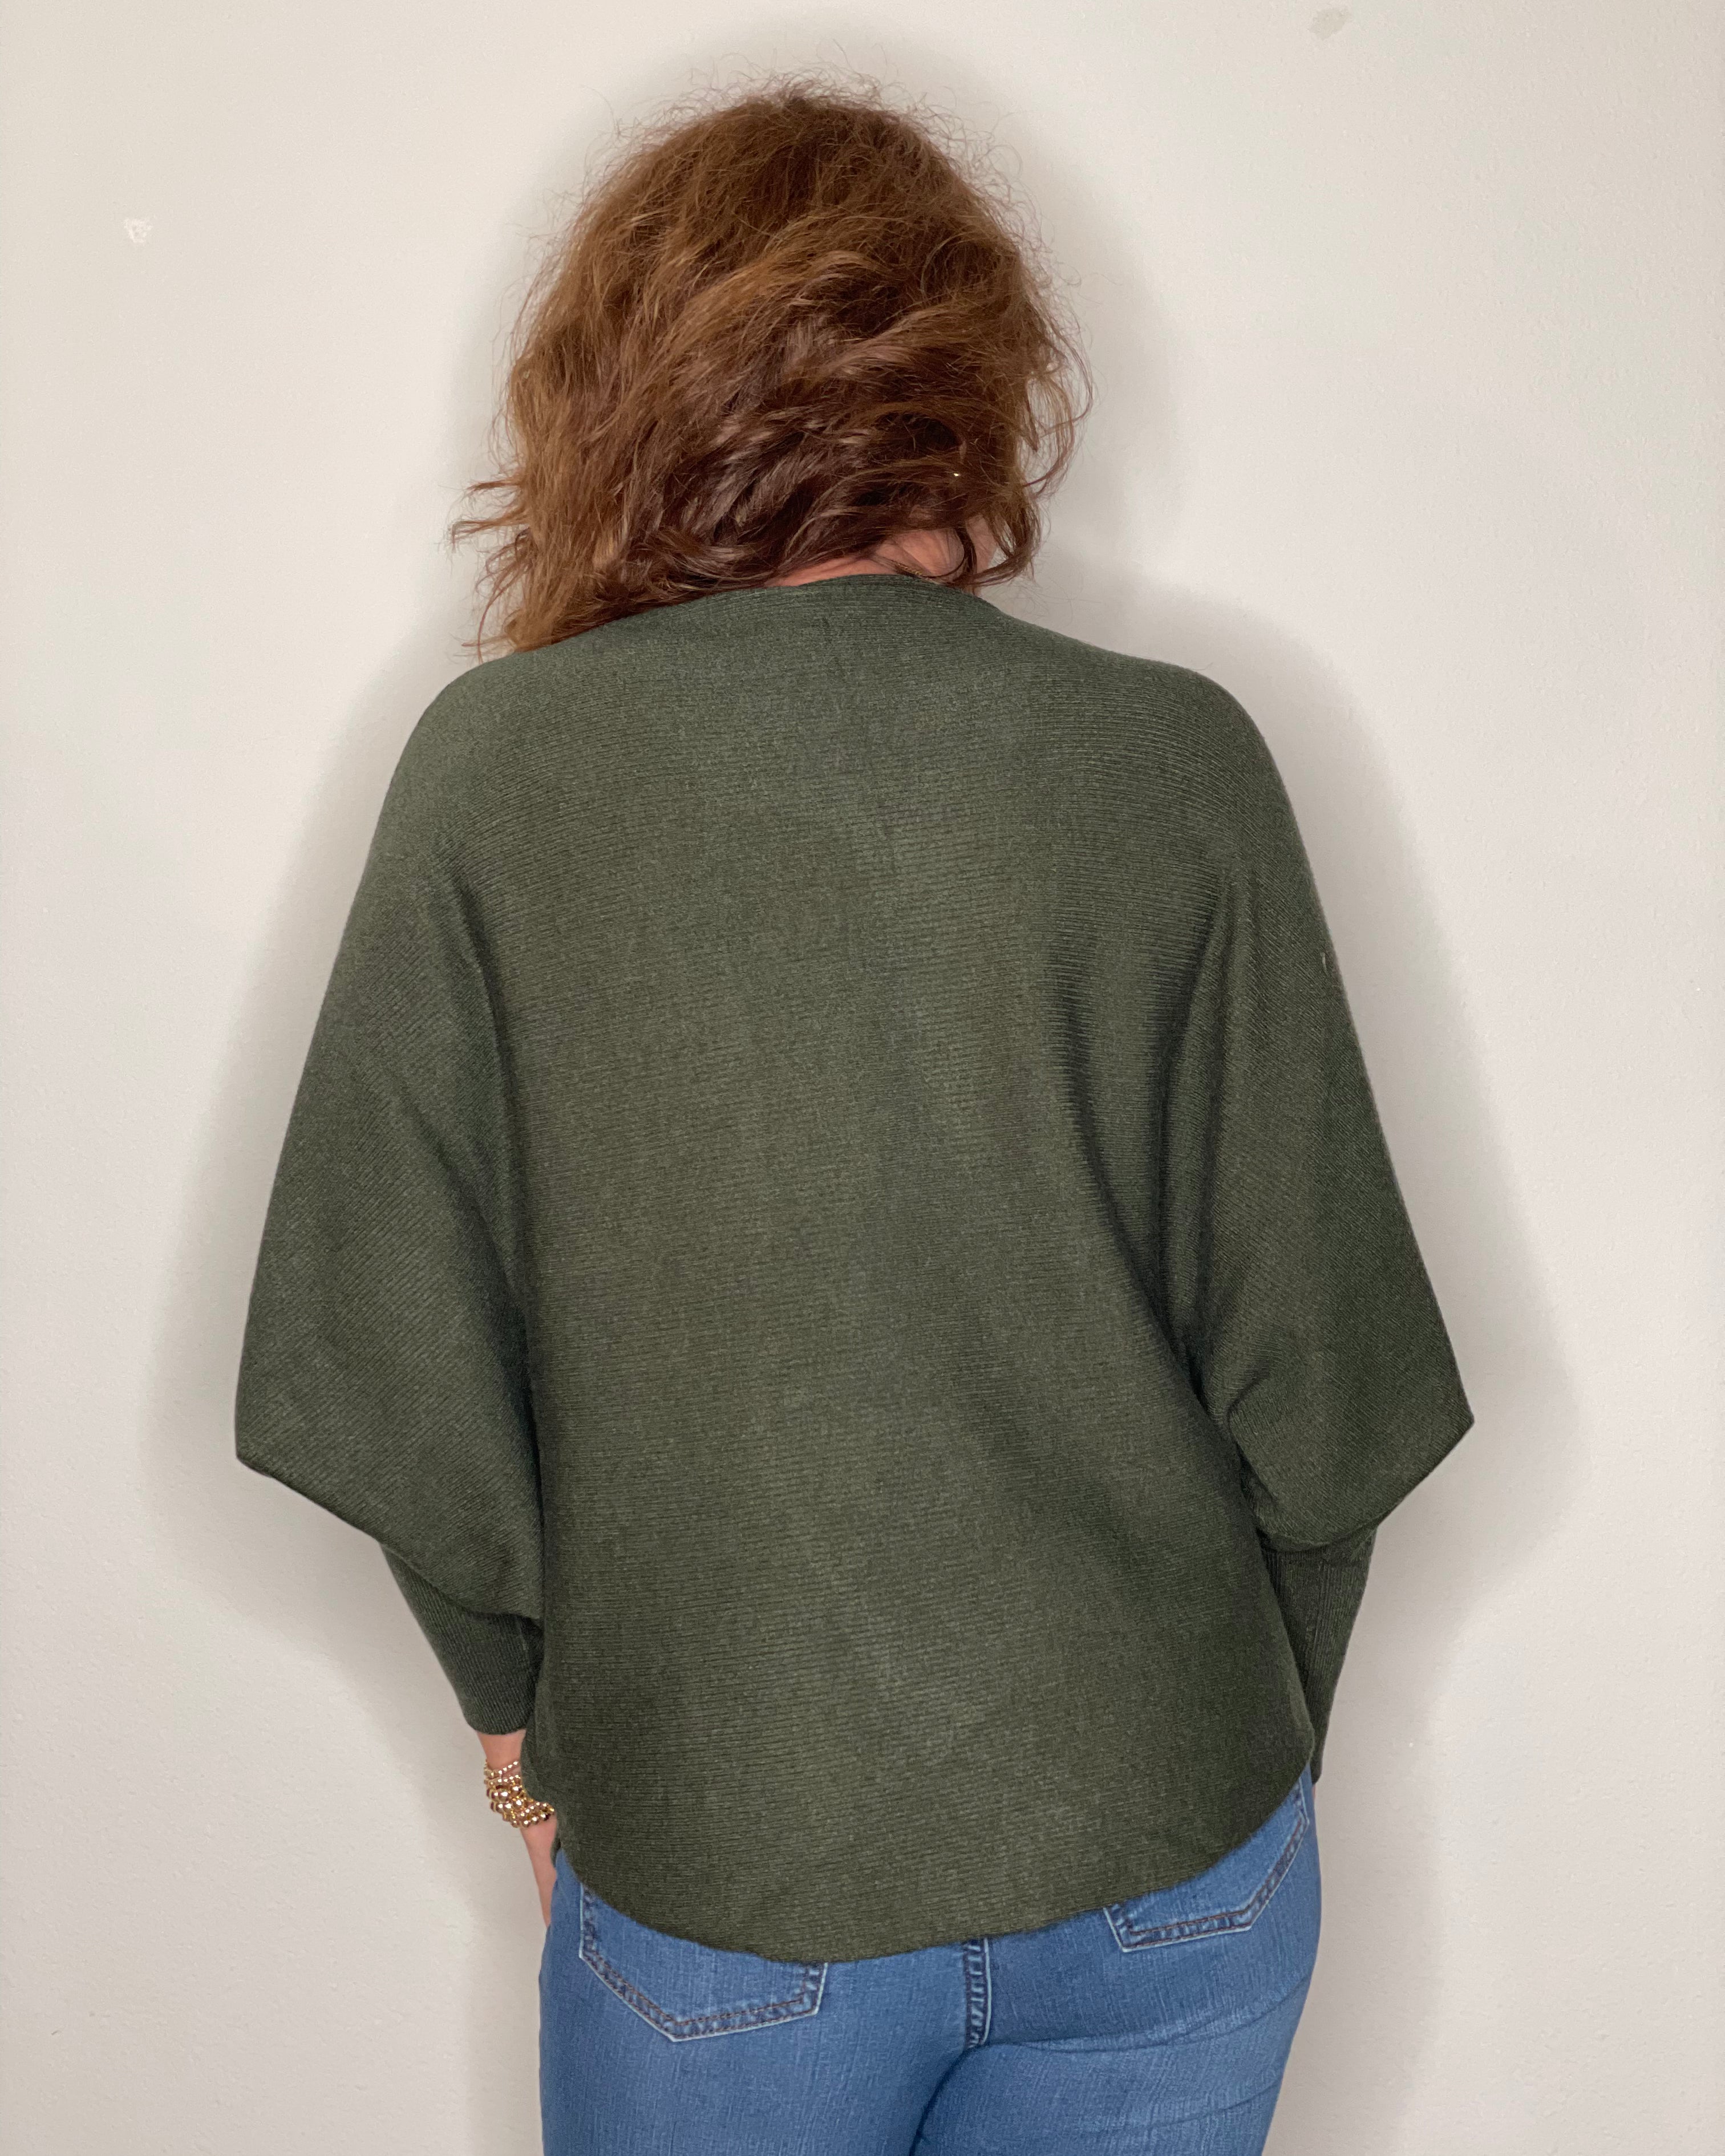 Ryu Top in Olive.